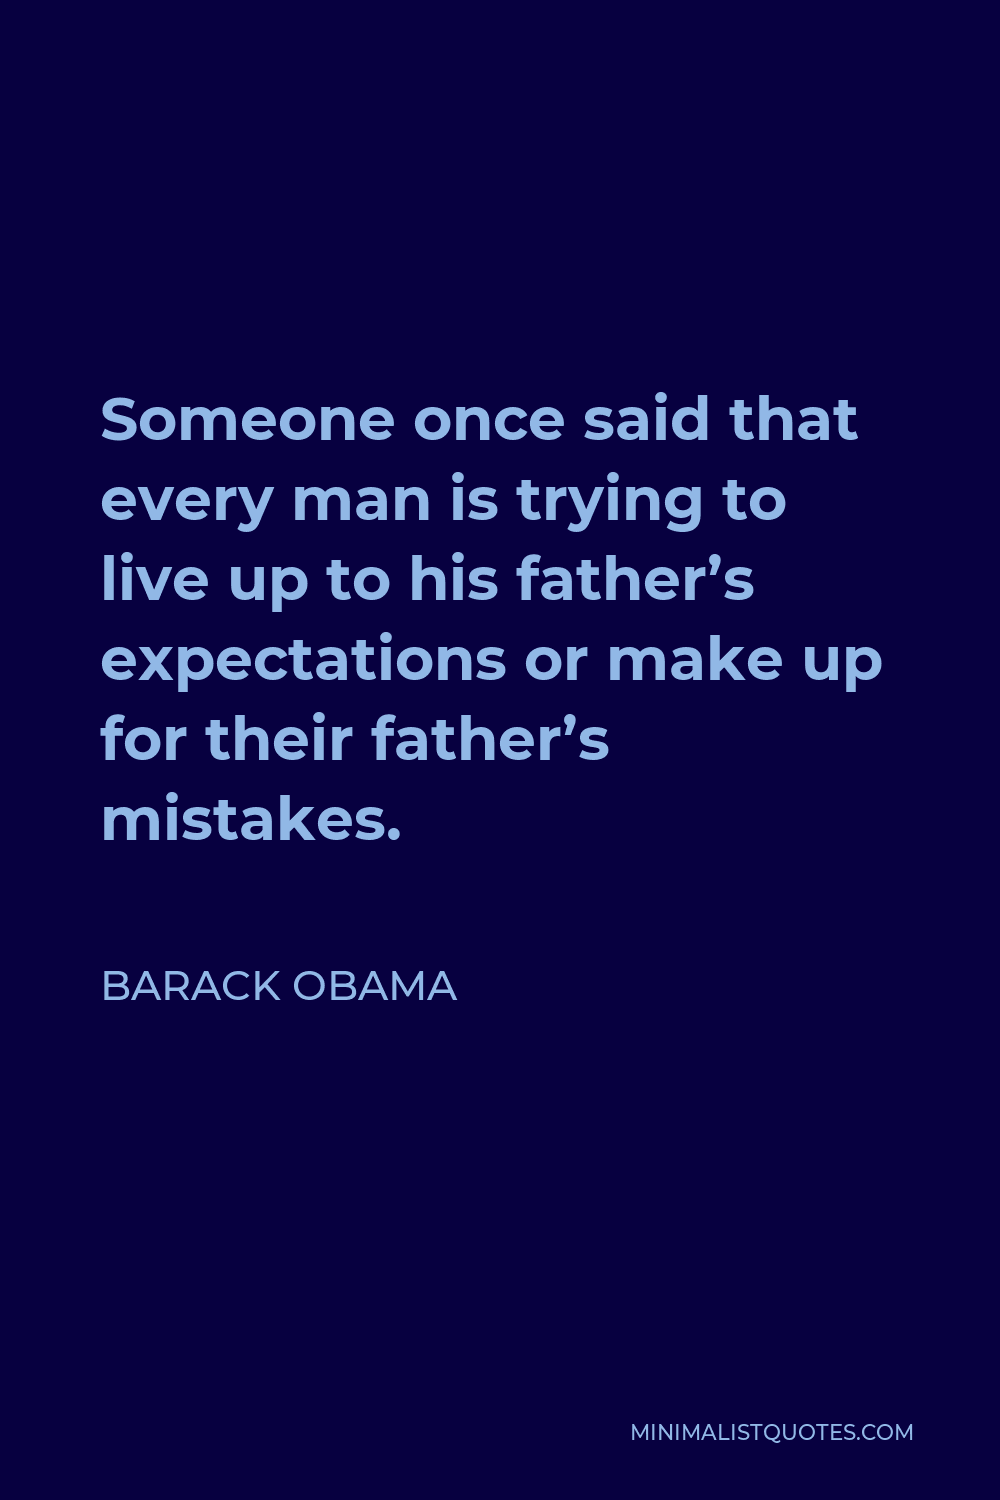 Barack Obama Quote - Someone once said that every man is trying to live up to his father’s expectations or make up for their father’s mistakes.